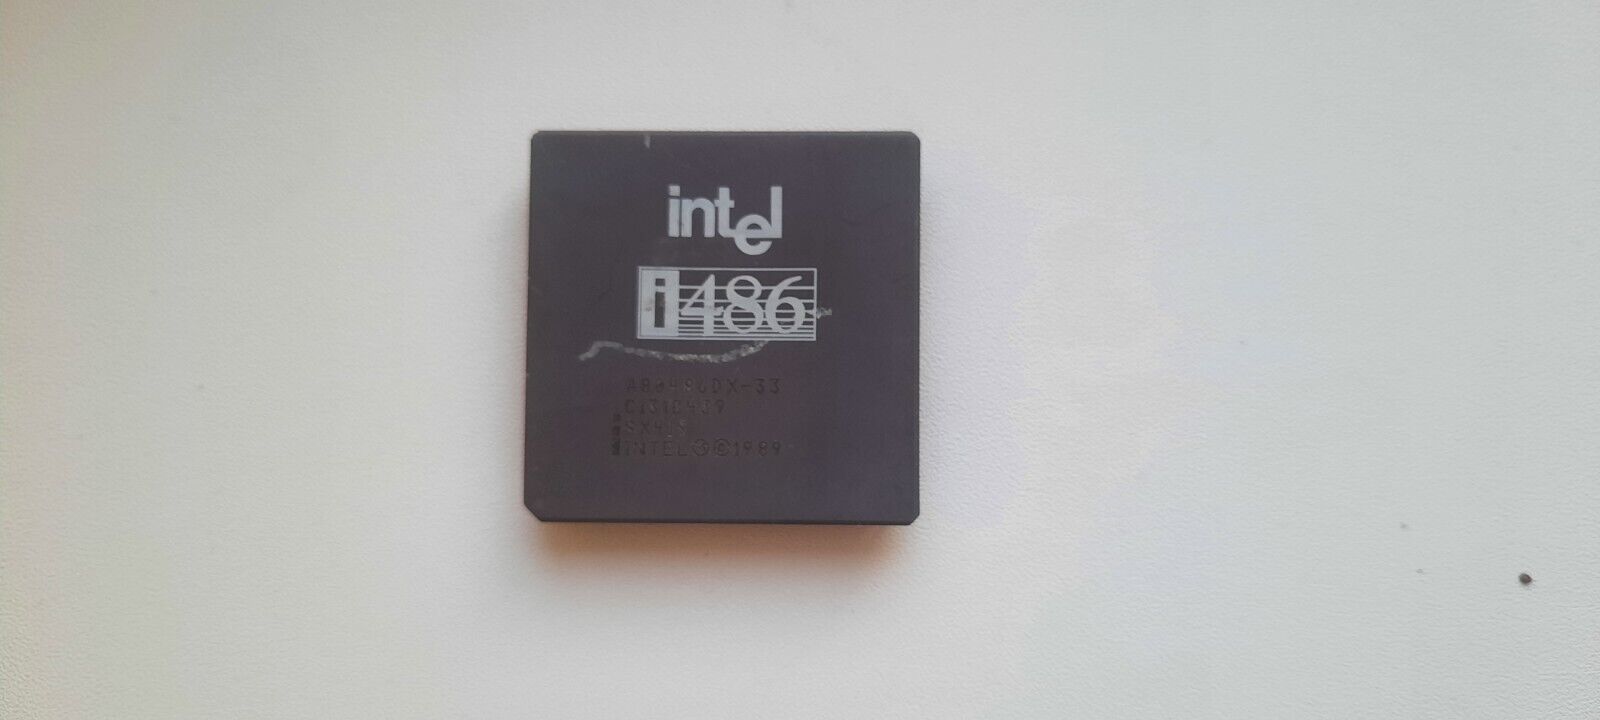 Intel A80486DX-33 SX419 486DX-33 old logo old date rare vintage CPU GOLD